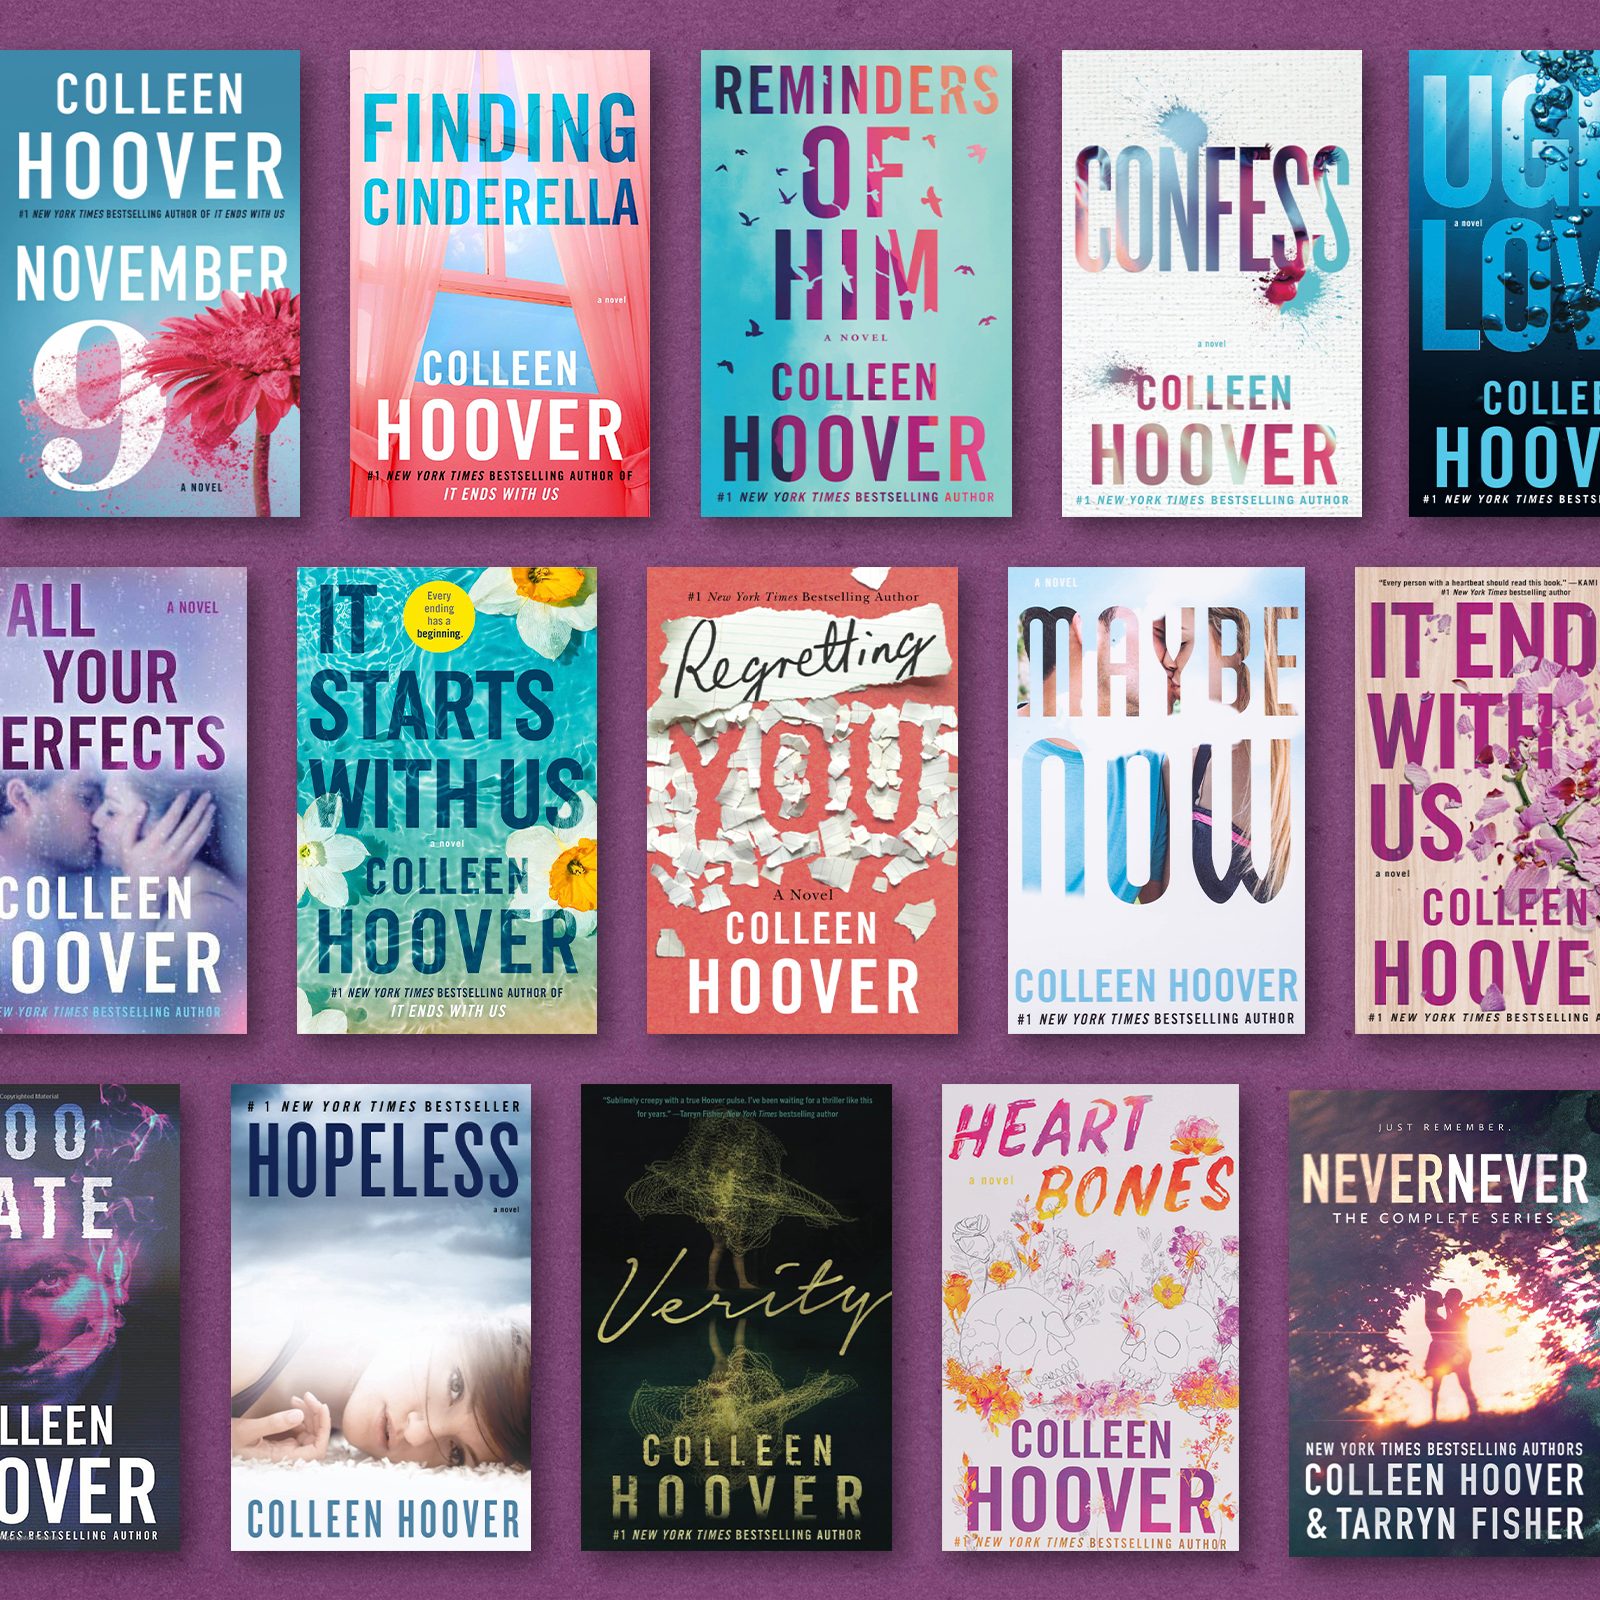 20 Best Colleen Hoover Books Ranked Readers #39 Favorite Books